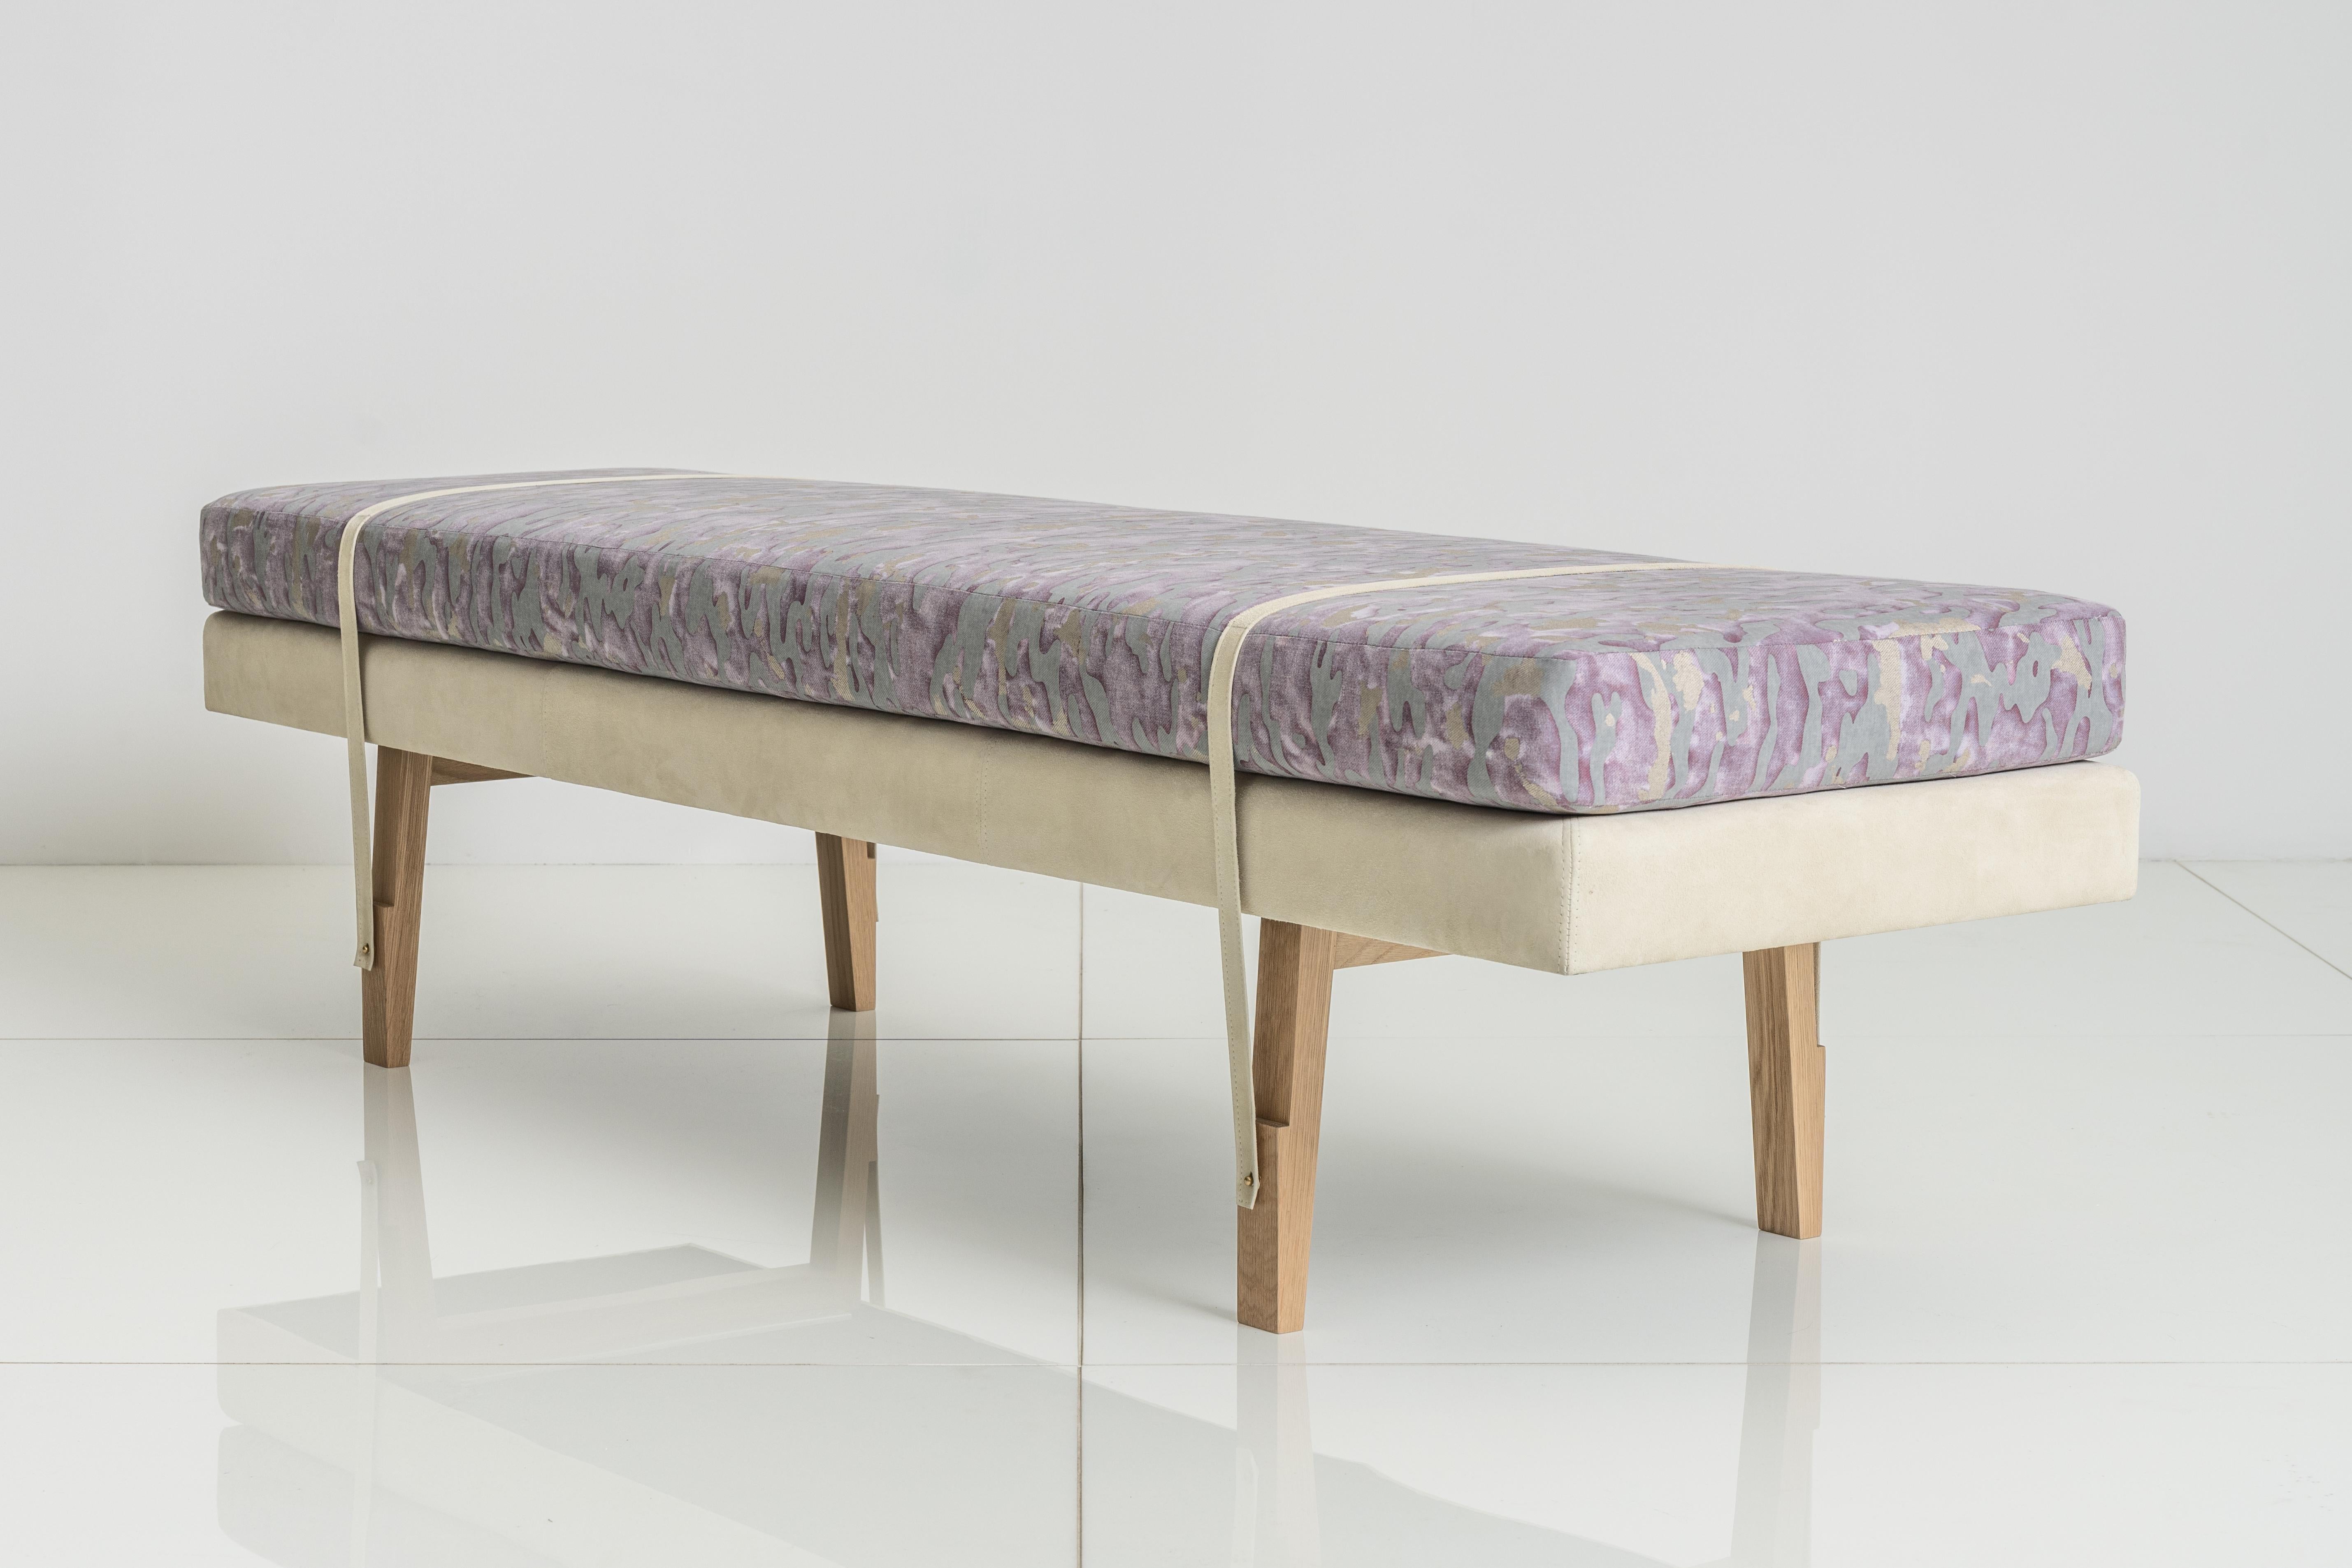 While benches are not typically associated with comfort, the Lennox Bench, with its twin cushions, is the embodiment of unexpected ease. Featuring Fortuny's Camo Isole fabric.

This is a natural product that may have slight imperfections. This is